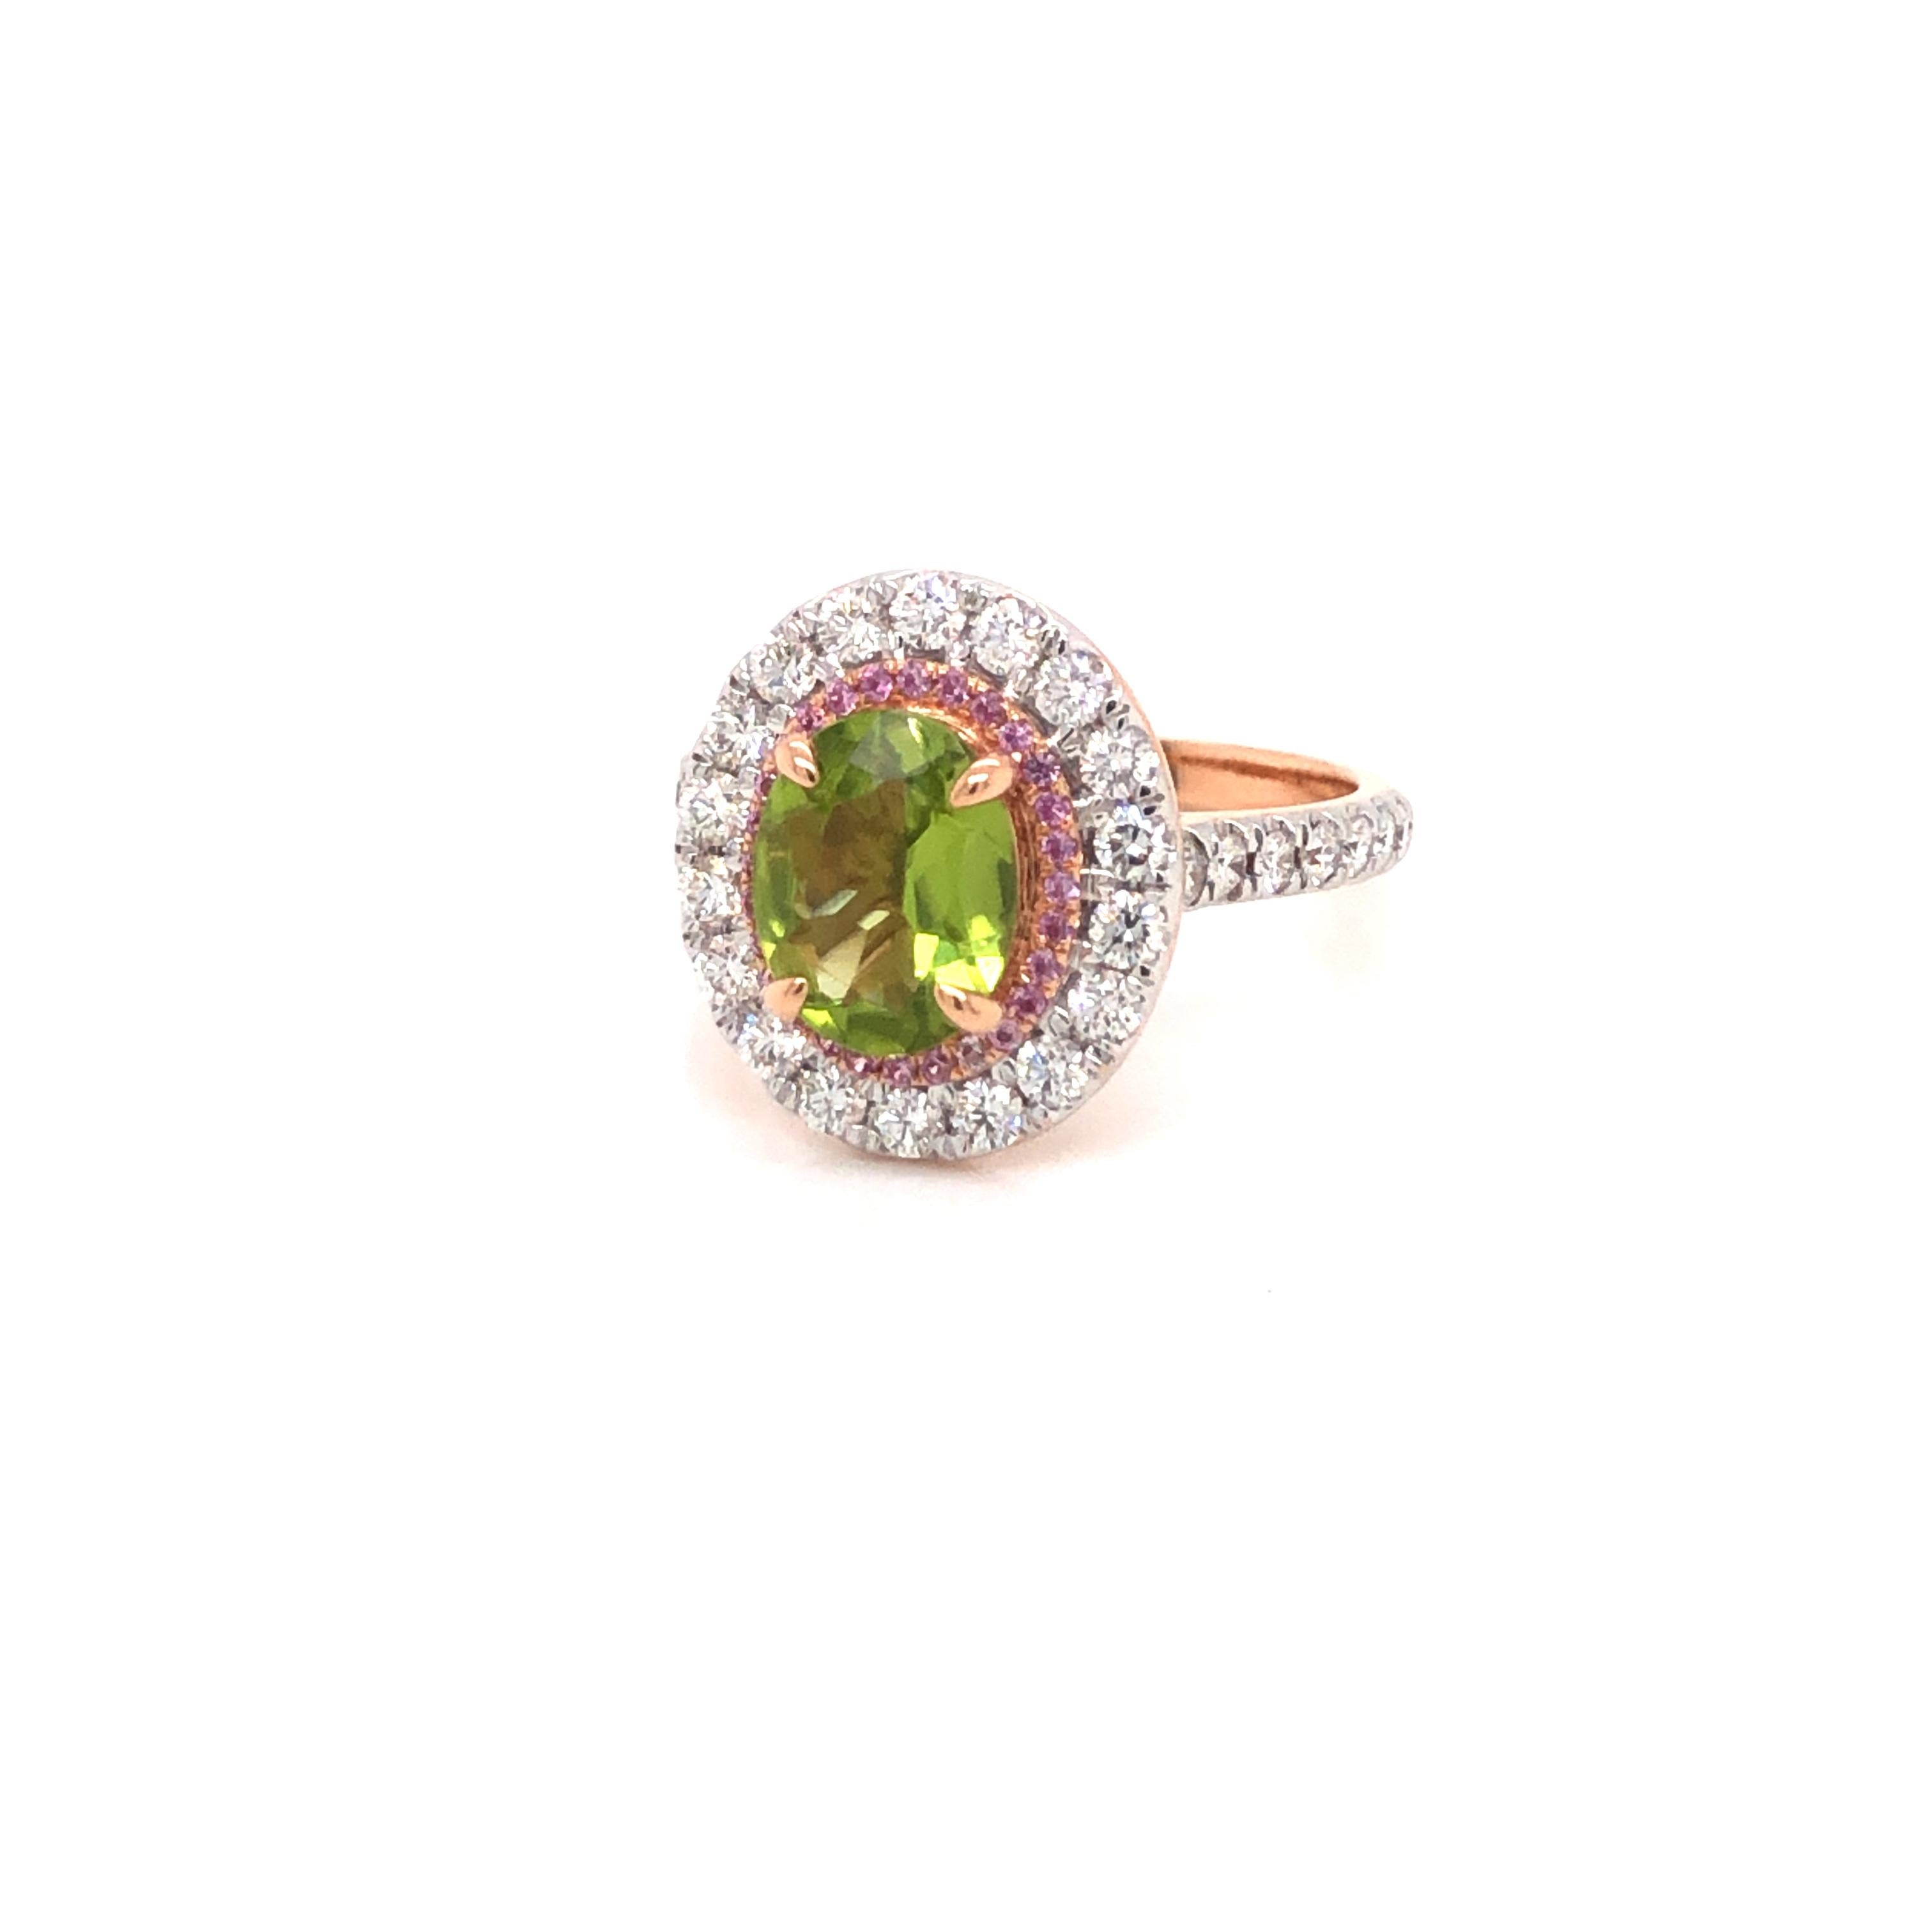 2.5 Carat Green Peridot Pink Sapphire Diamond Engagement Cocktail 18KT Ring For Sale 10